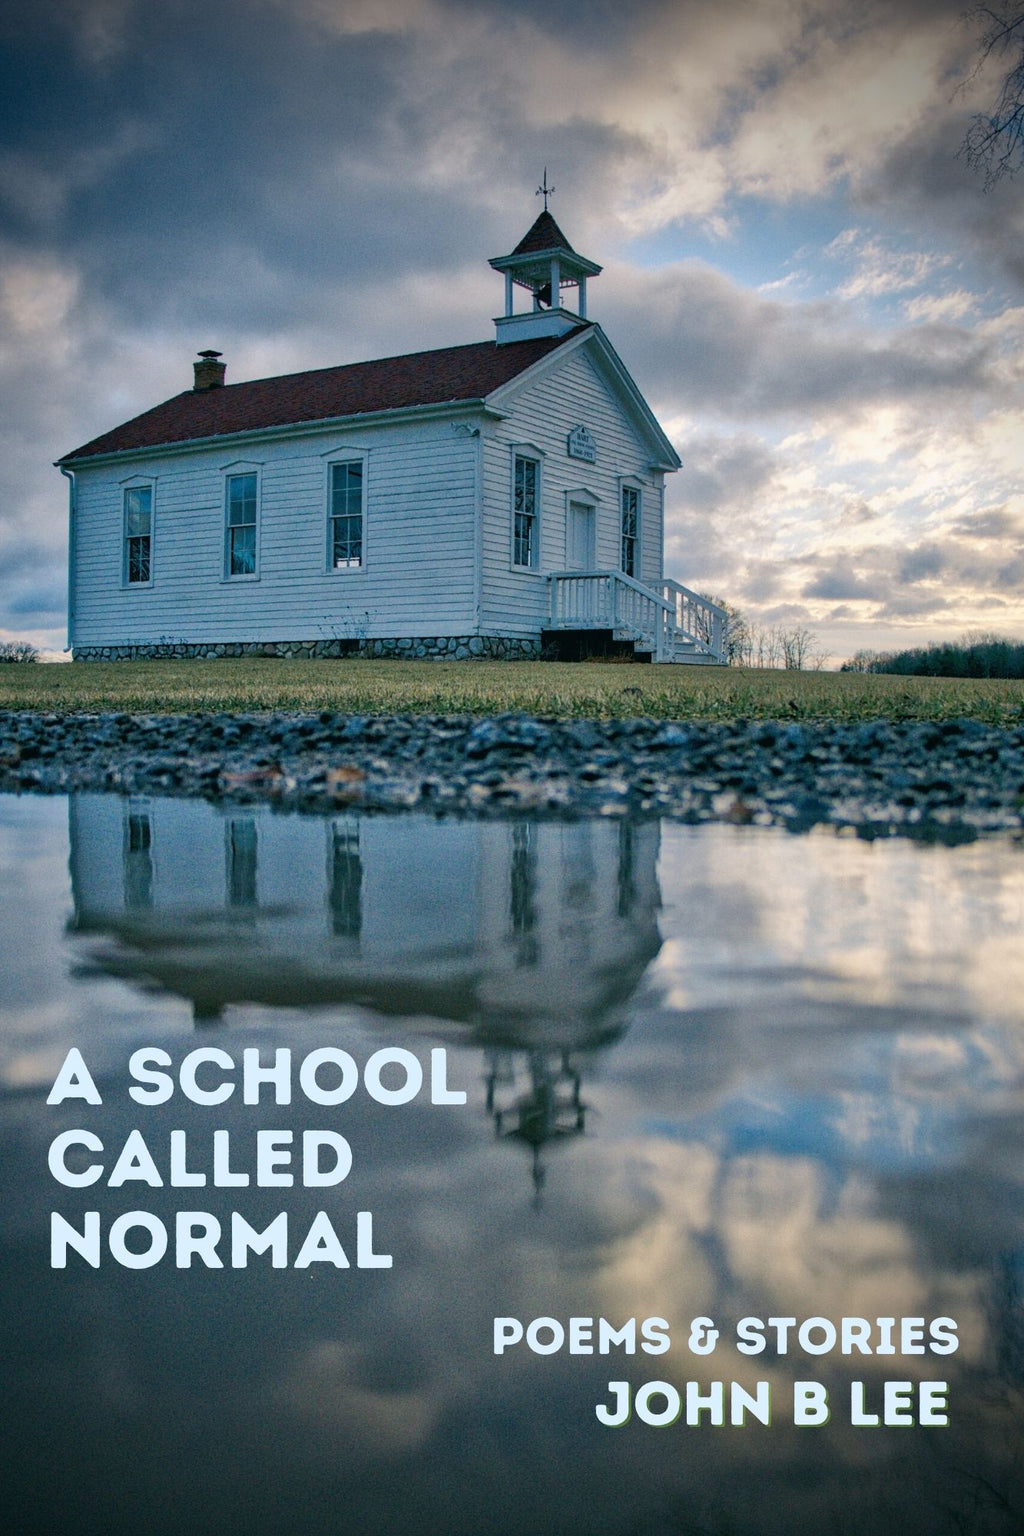 A School Called Normal